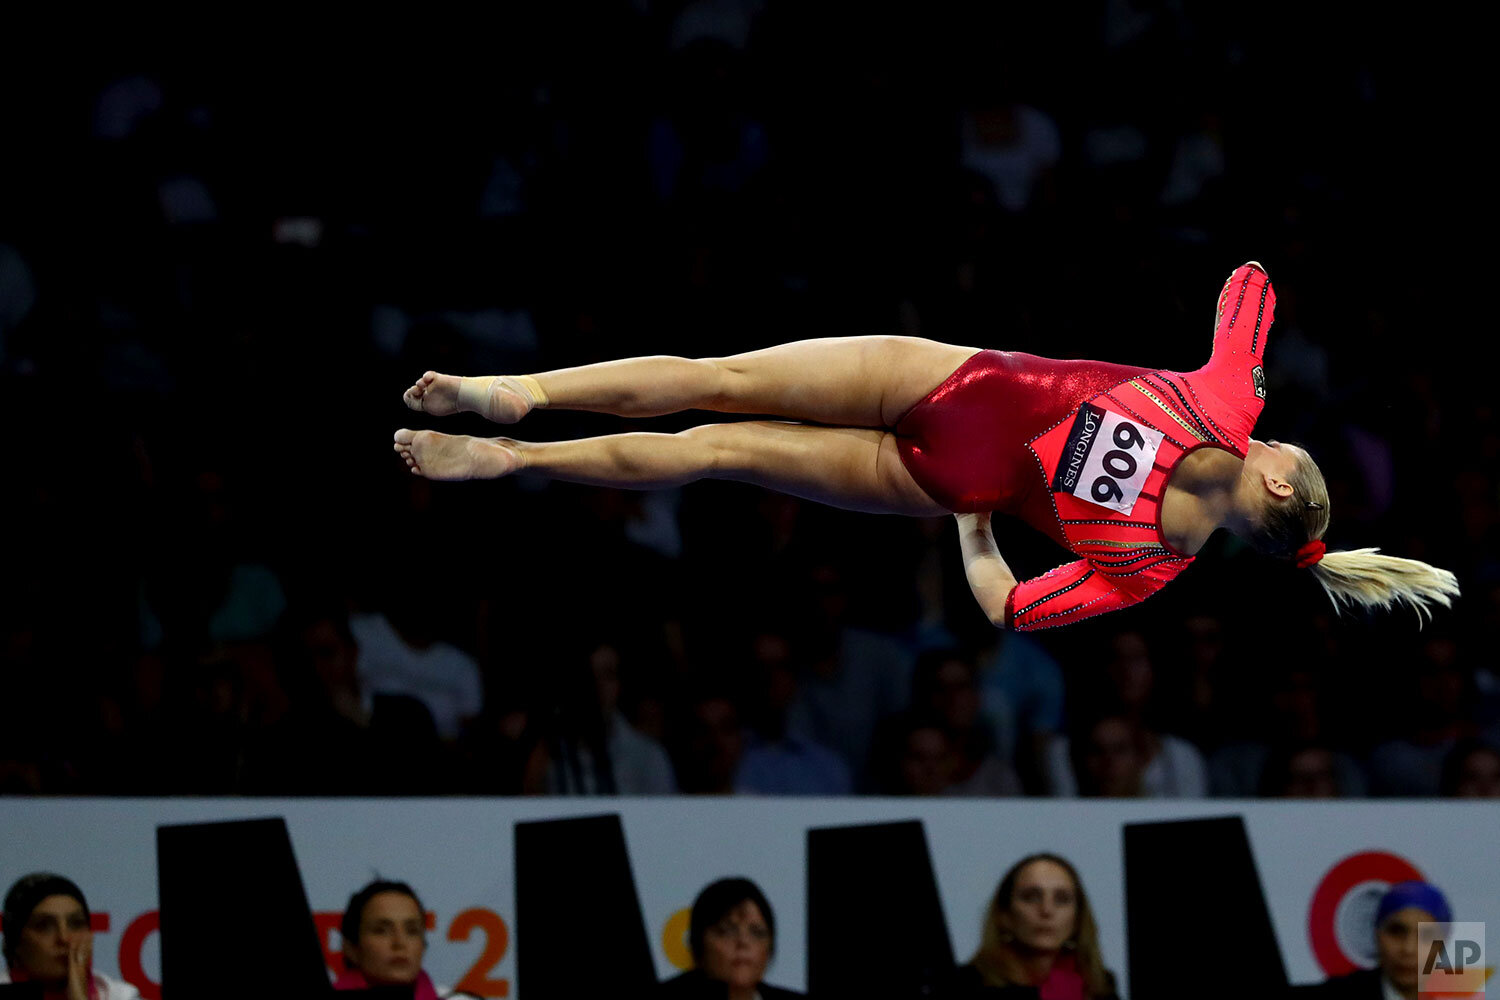  Elisabeth Seitz of Germany performs on the balance beam during the women's all-around final at the Gymnastics World Championships in Stuttgart, Germany, Thursday, Oct. 10, 2019. (AP Photo/Matthias Schrader) 